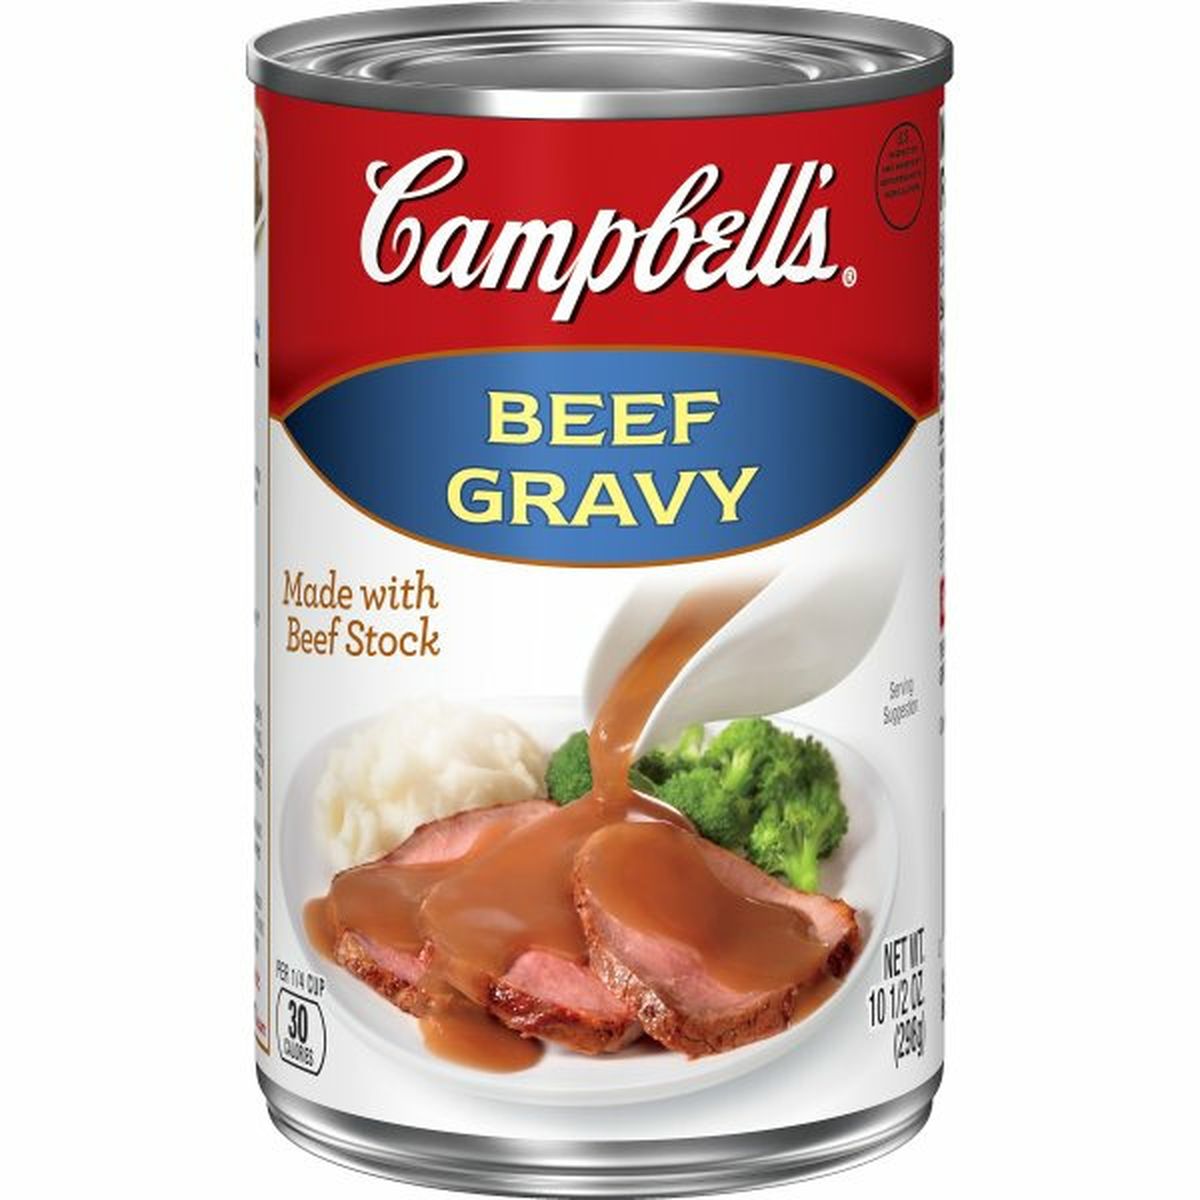 Calories in Campbell'ss Beef Gravy